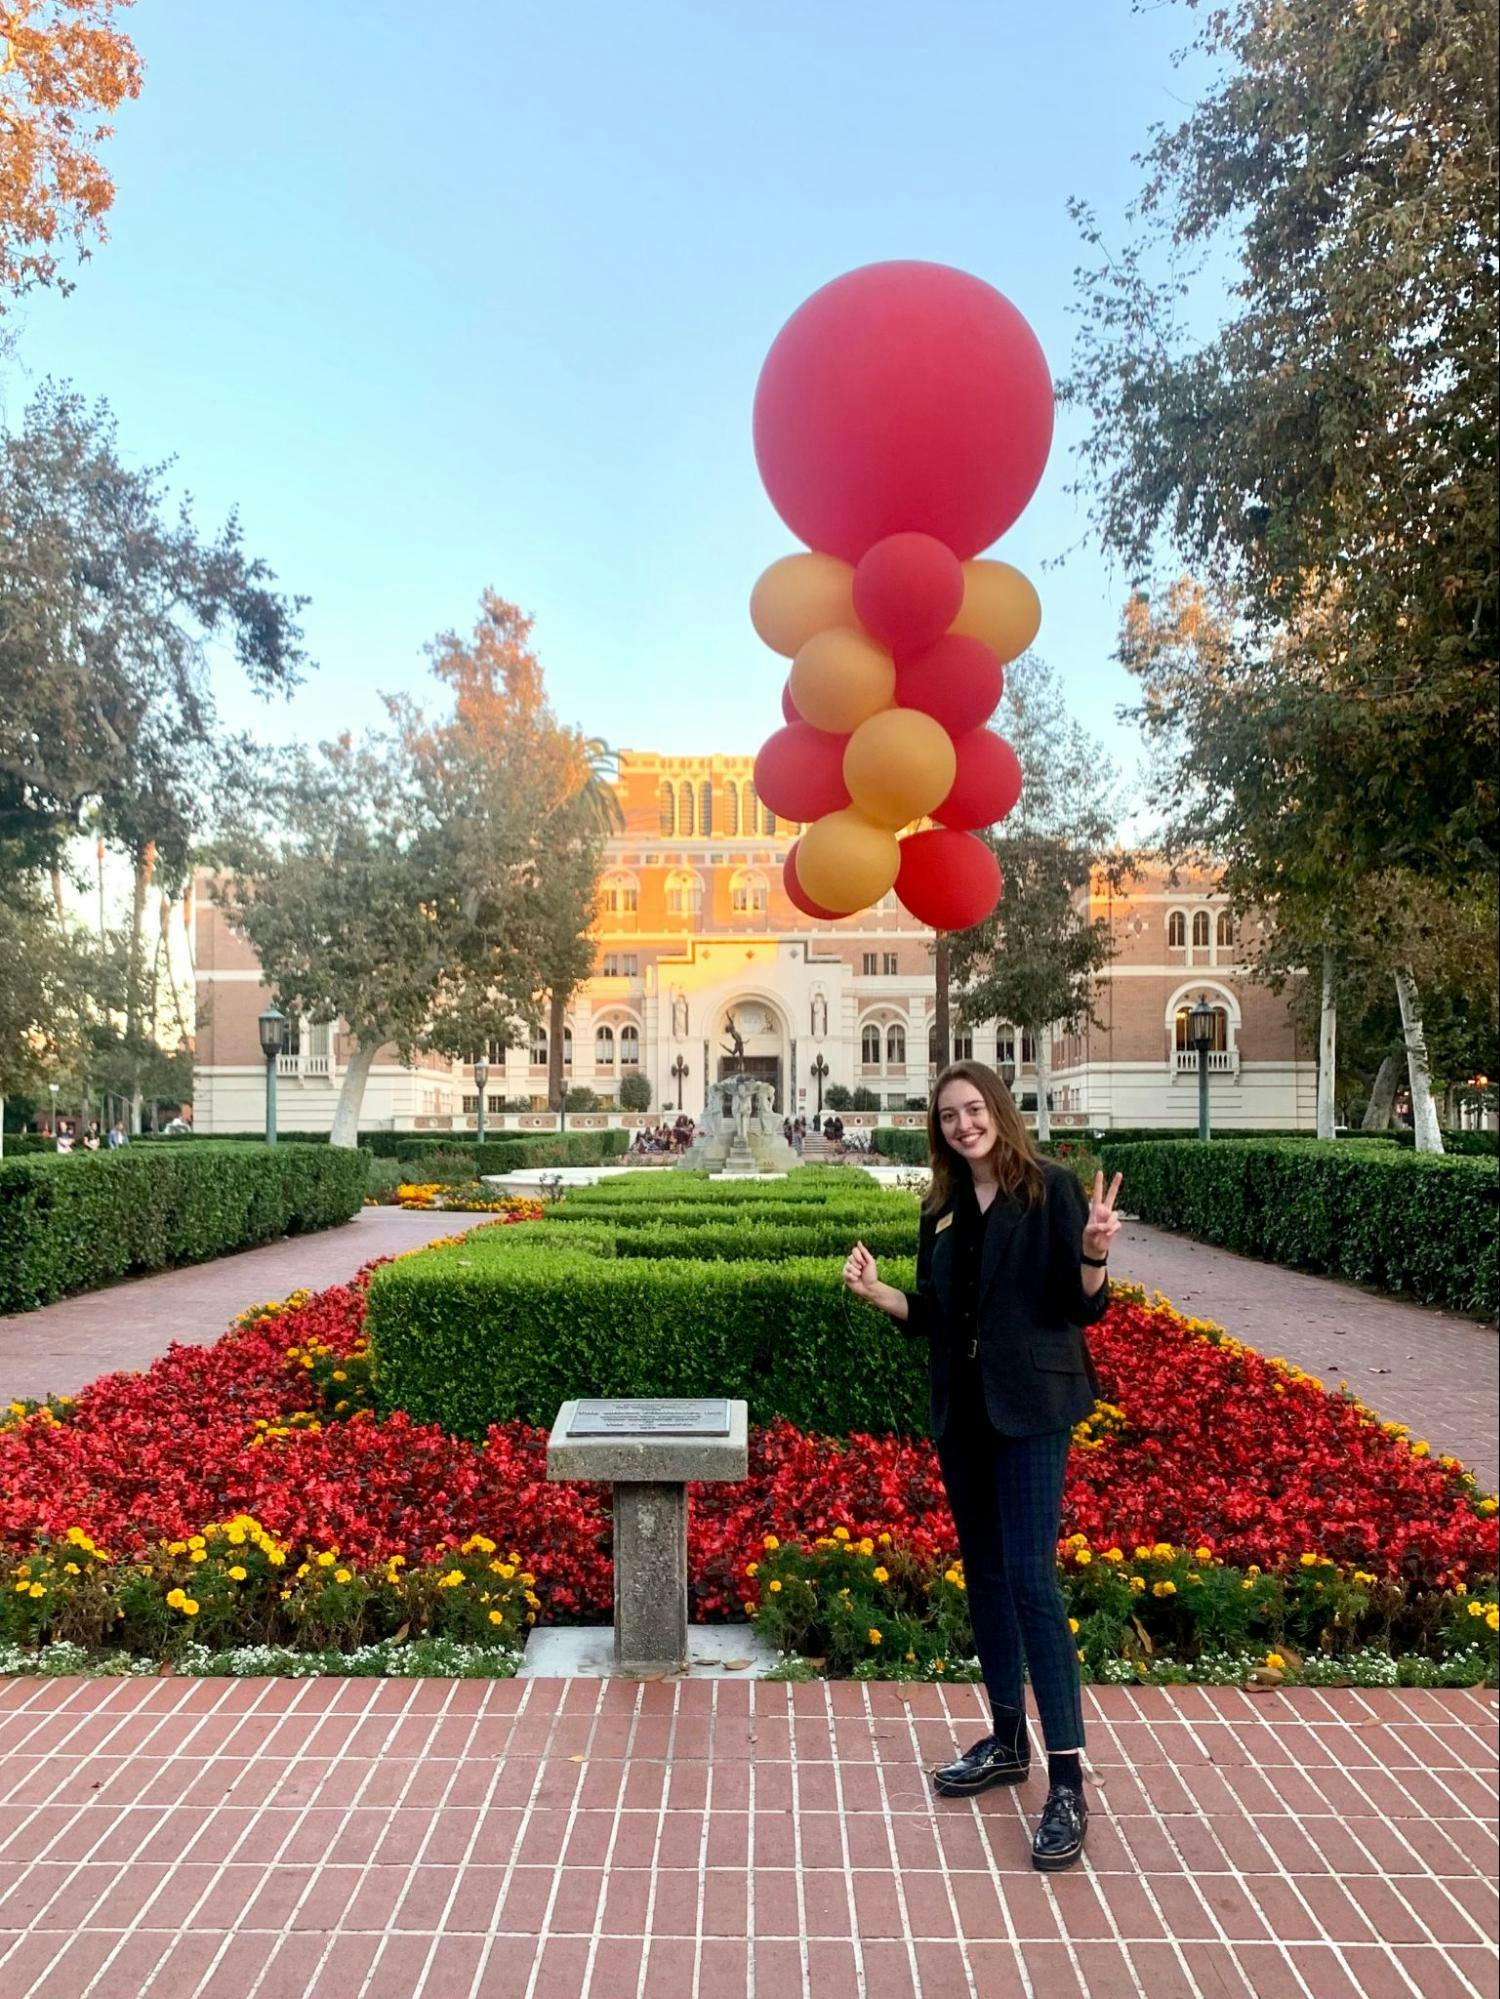 A young woman poses in front of cardinal and gold flowers and balloons